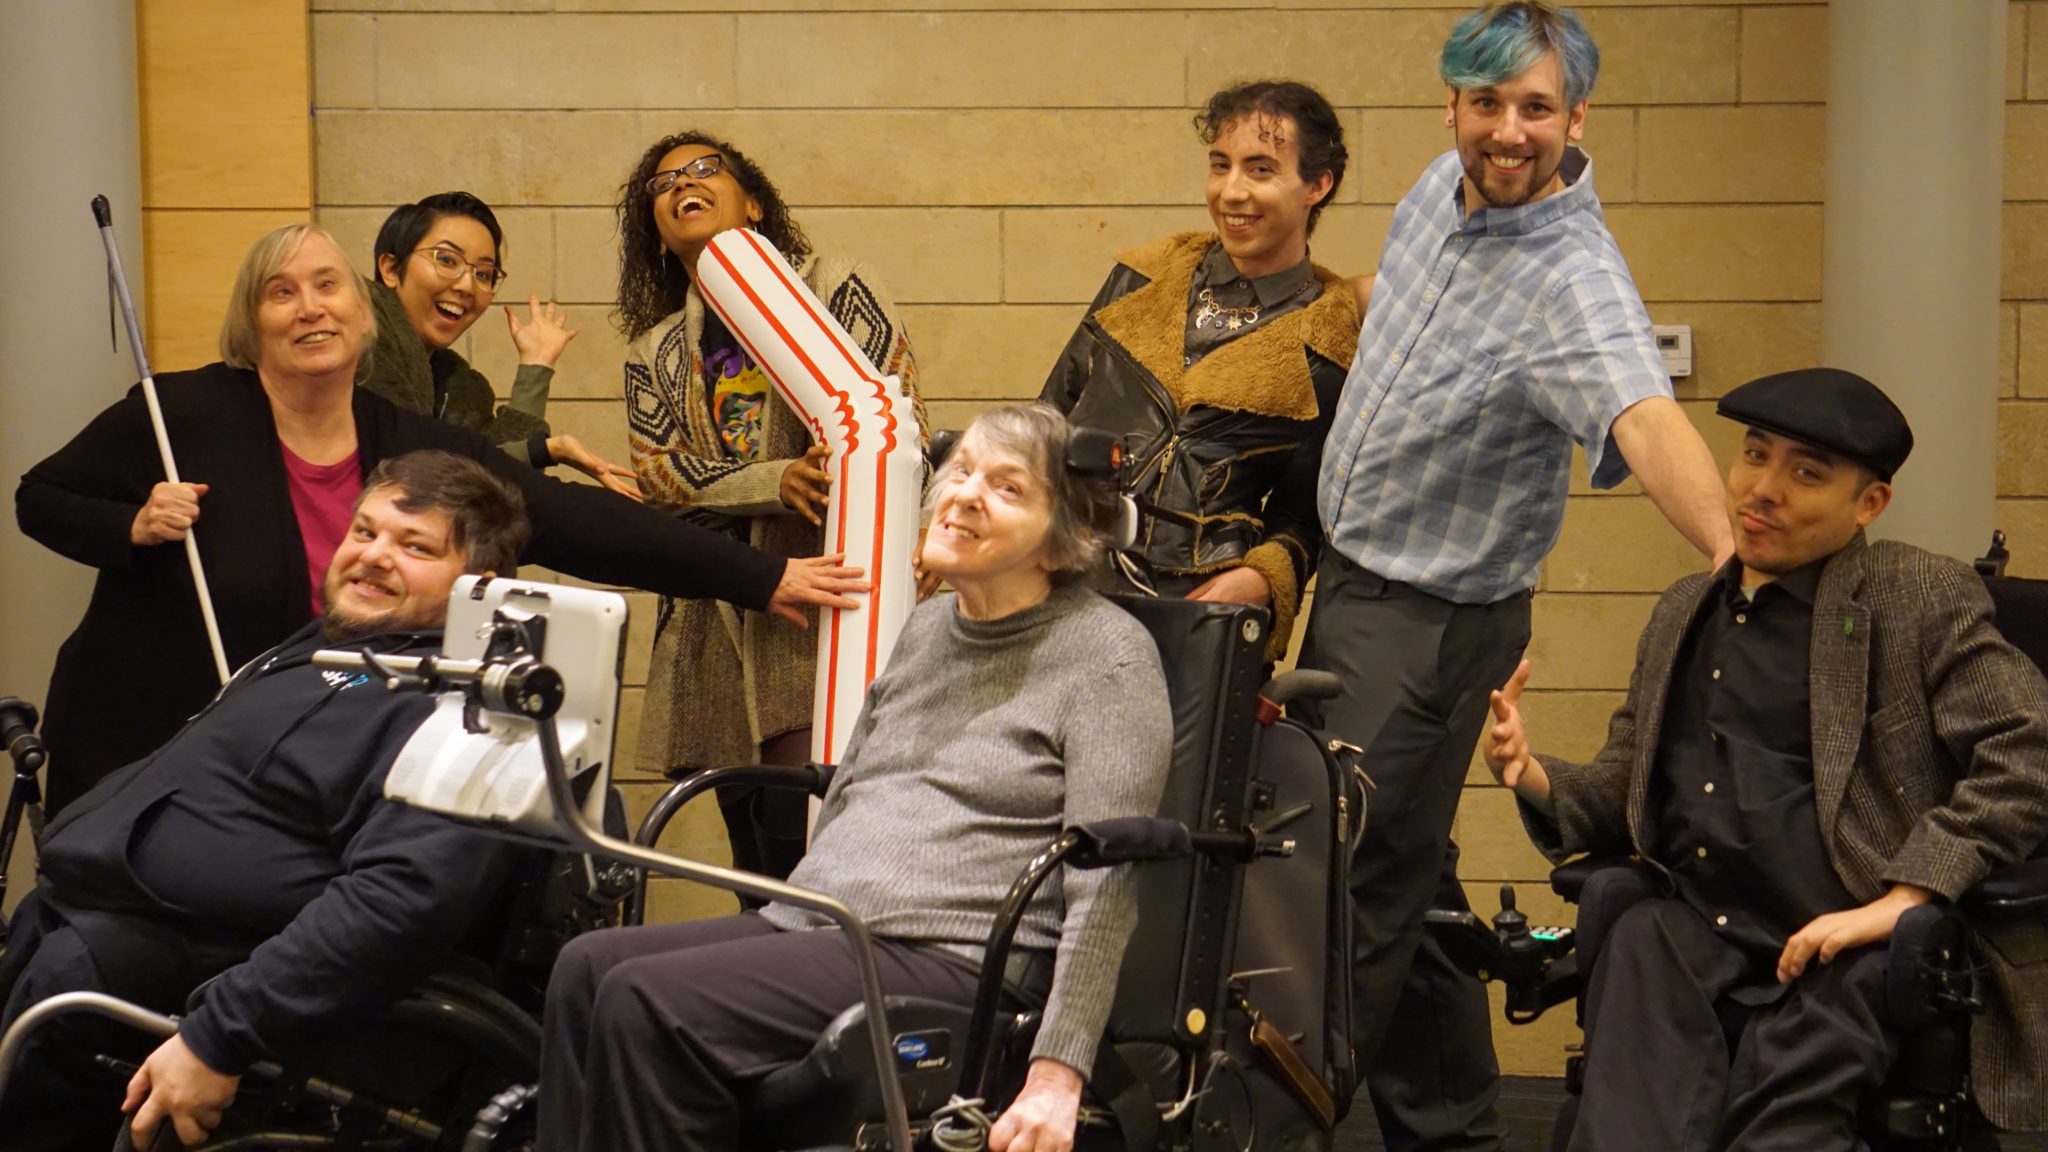 A group of people together at an event for people with disabilities.